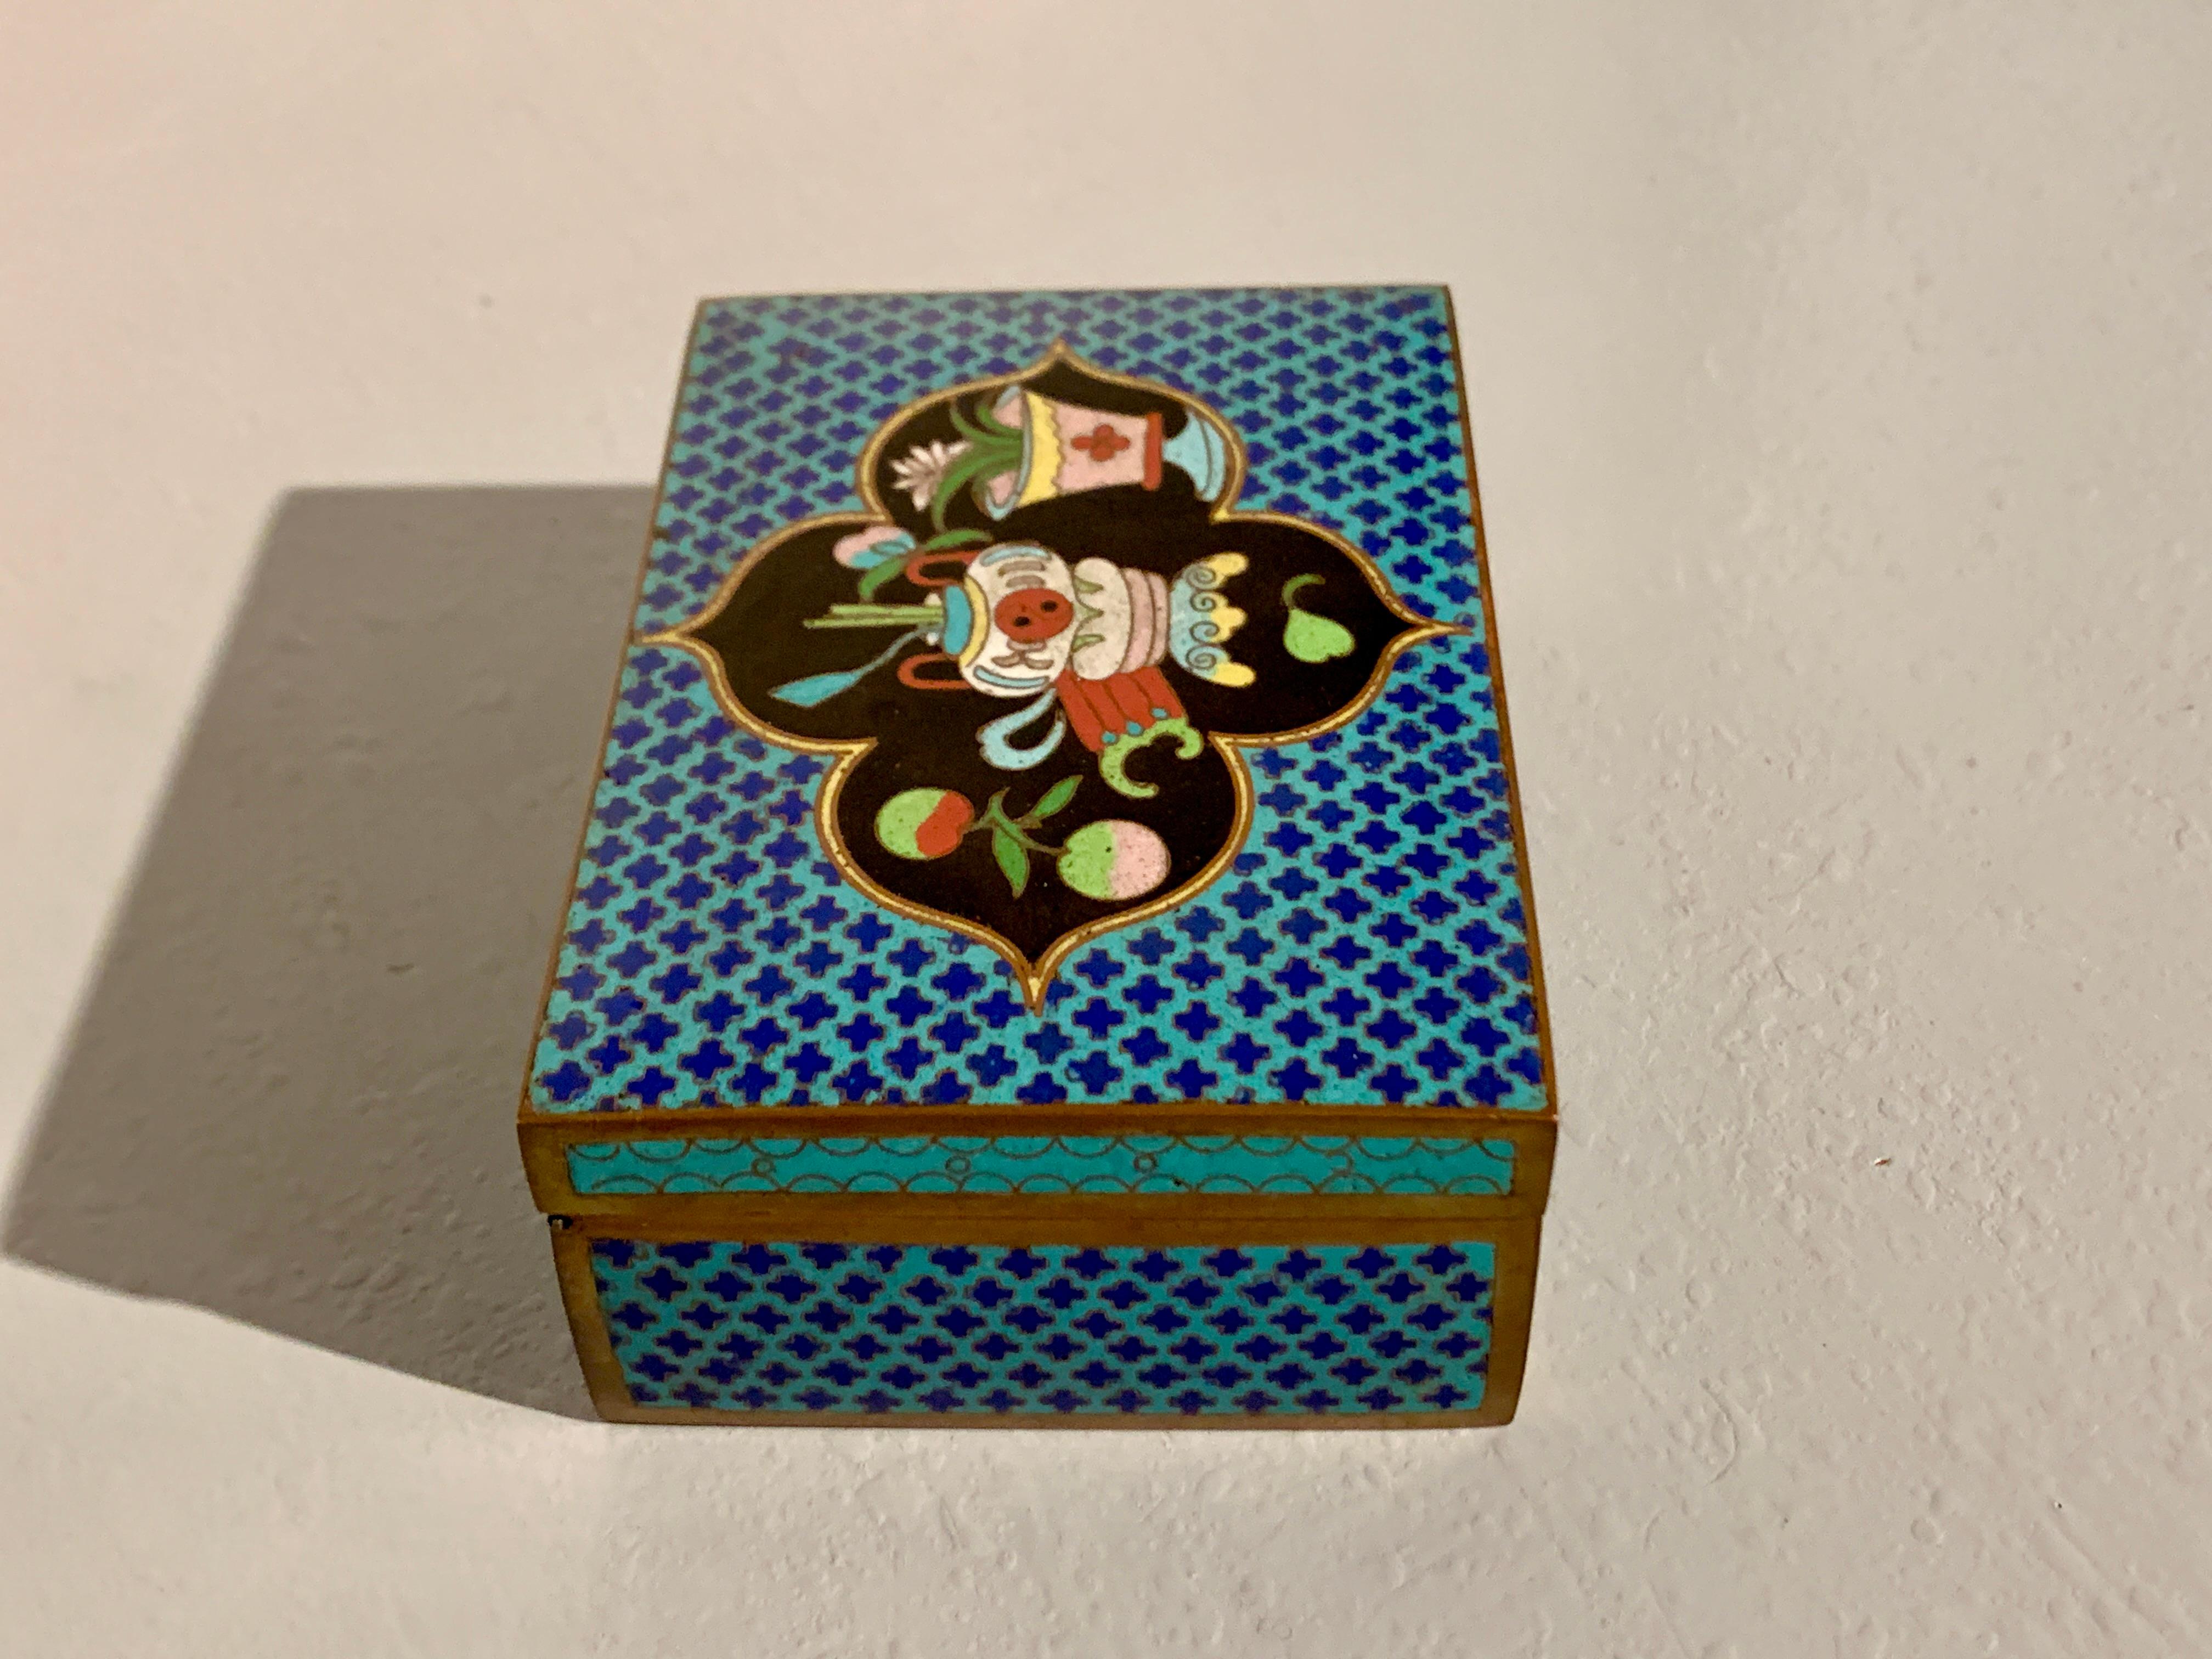 A lovely Chinese turquoise cloisonne trinket box with images of the Hundred Antiques, Republic Period, circa 1920, China.

The rectangular box decorated with a field of quatrefoils of lapis blue cloisonne against a turquoise blue cloisonne ground.